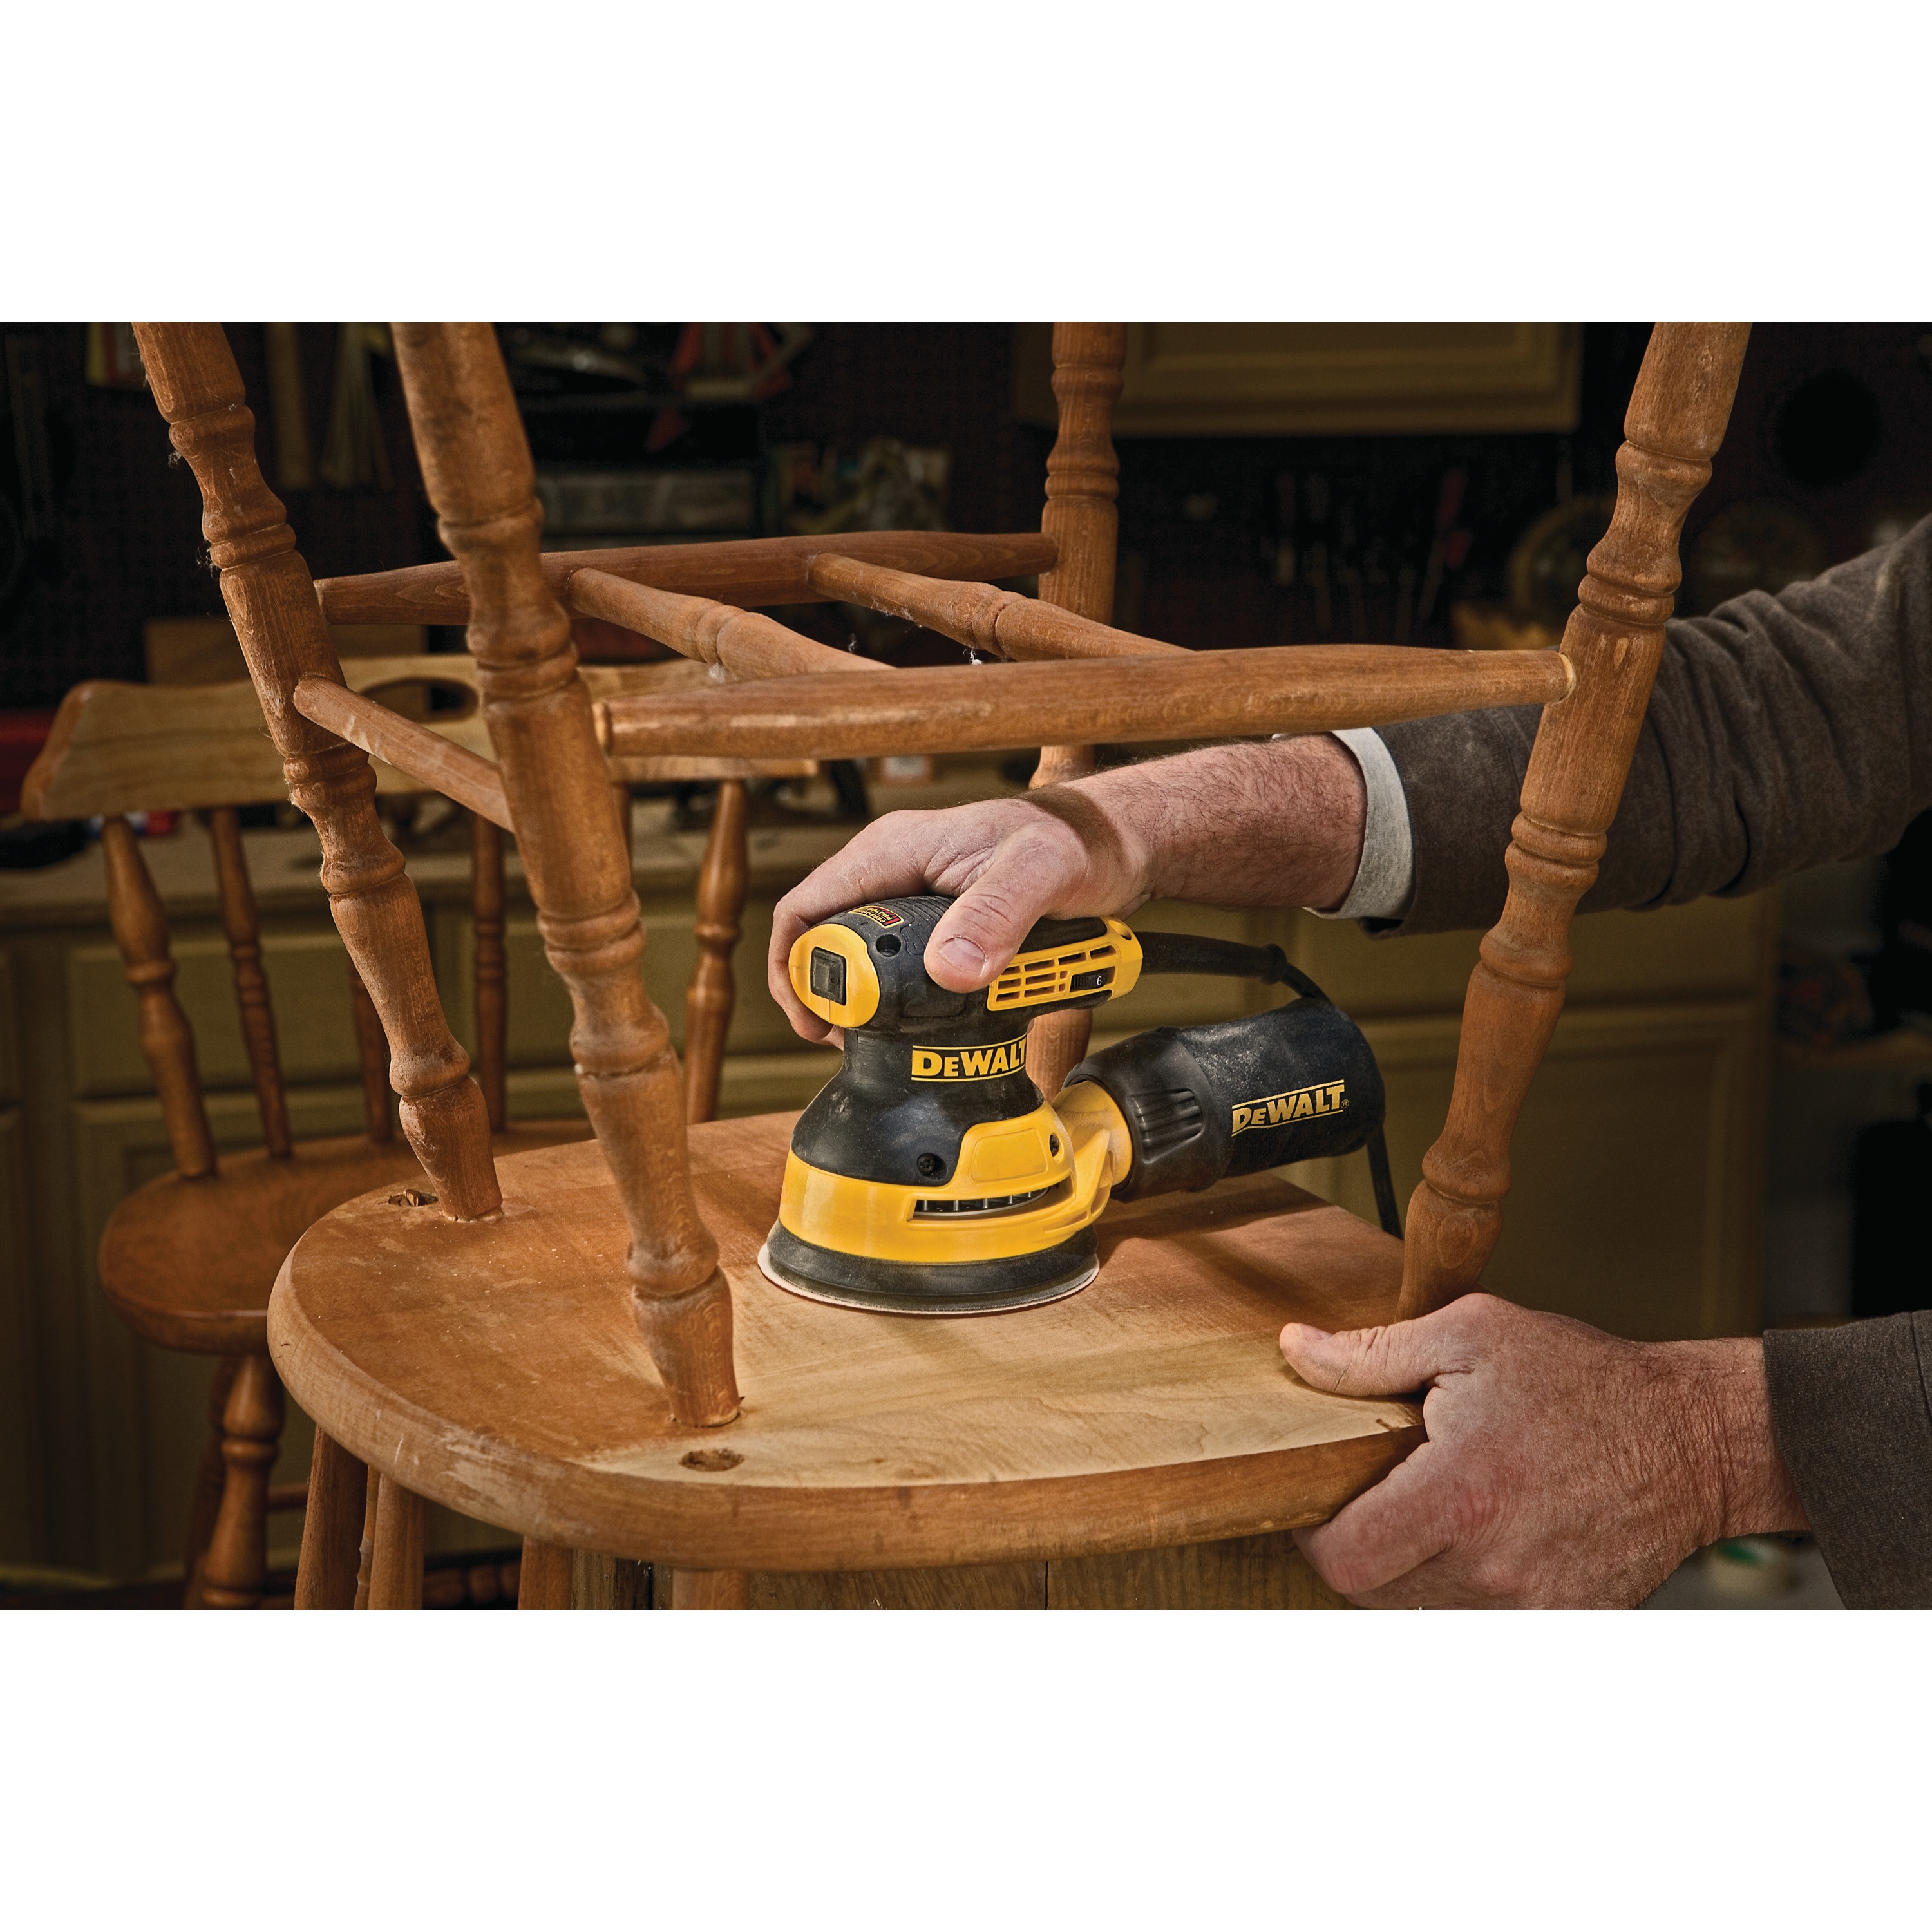 5 inch variable speed random orbit sander with H and L pad in action on bottom of a wooden chair.